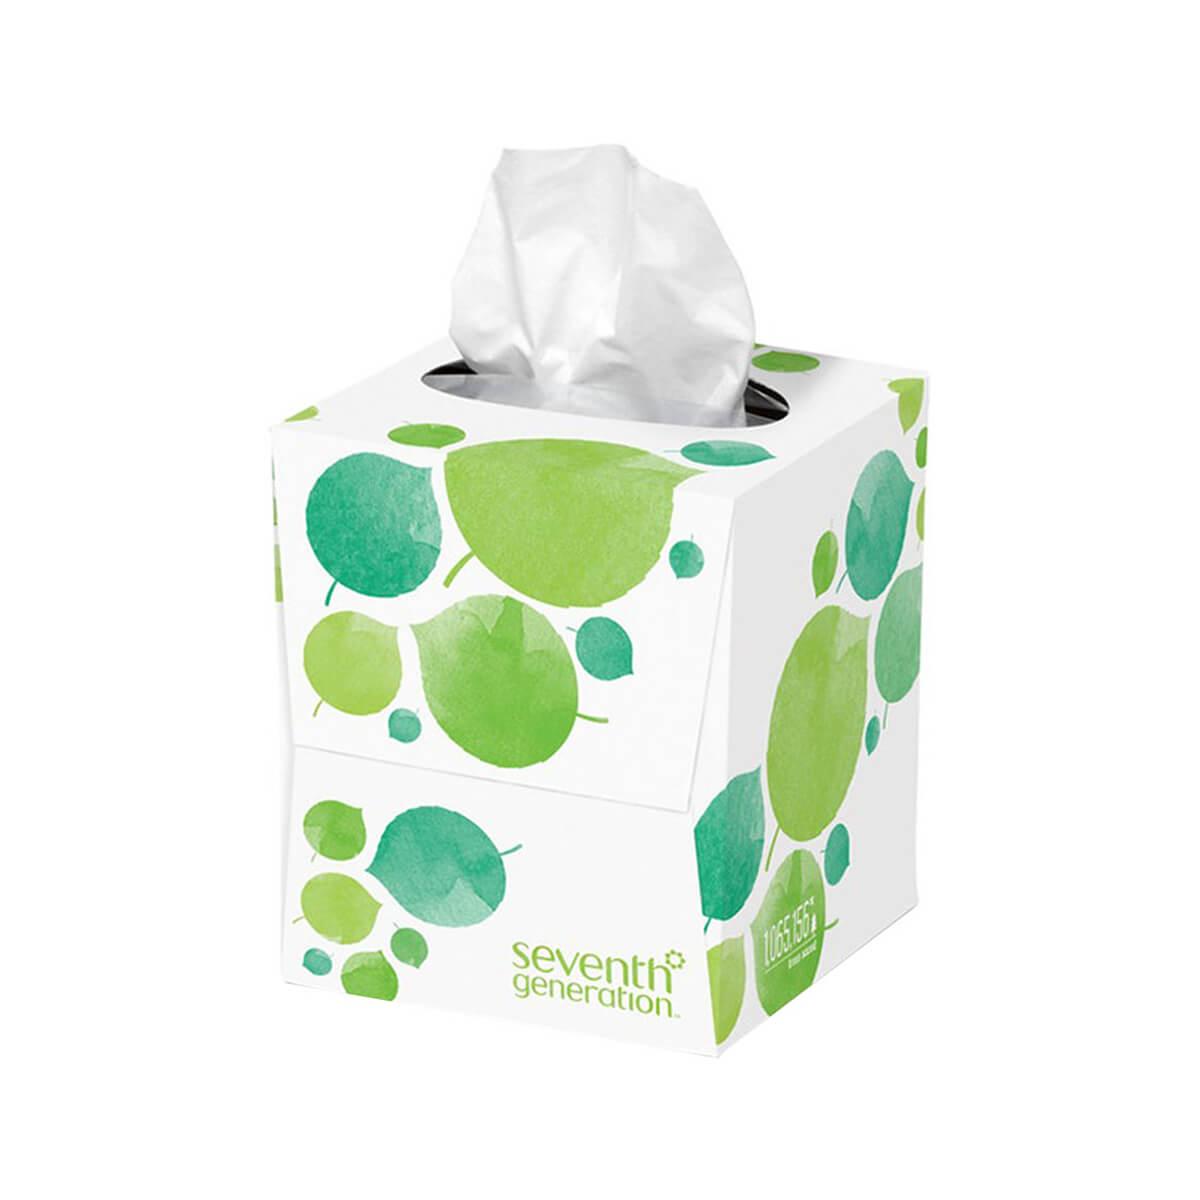  Seventh Generation 2- Ply White Facial Tissue